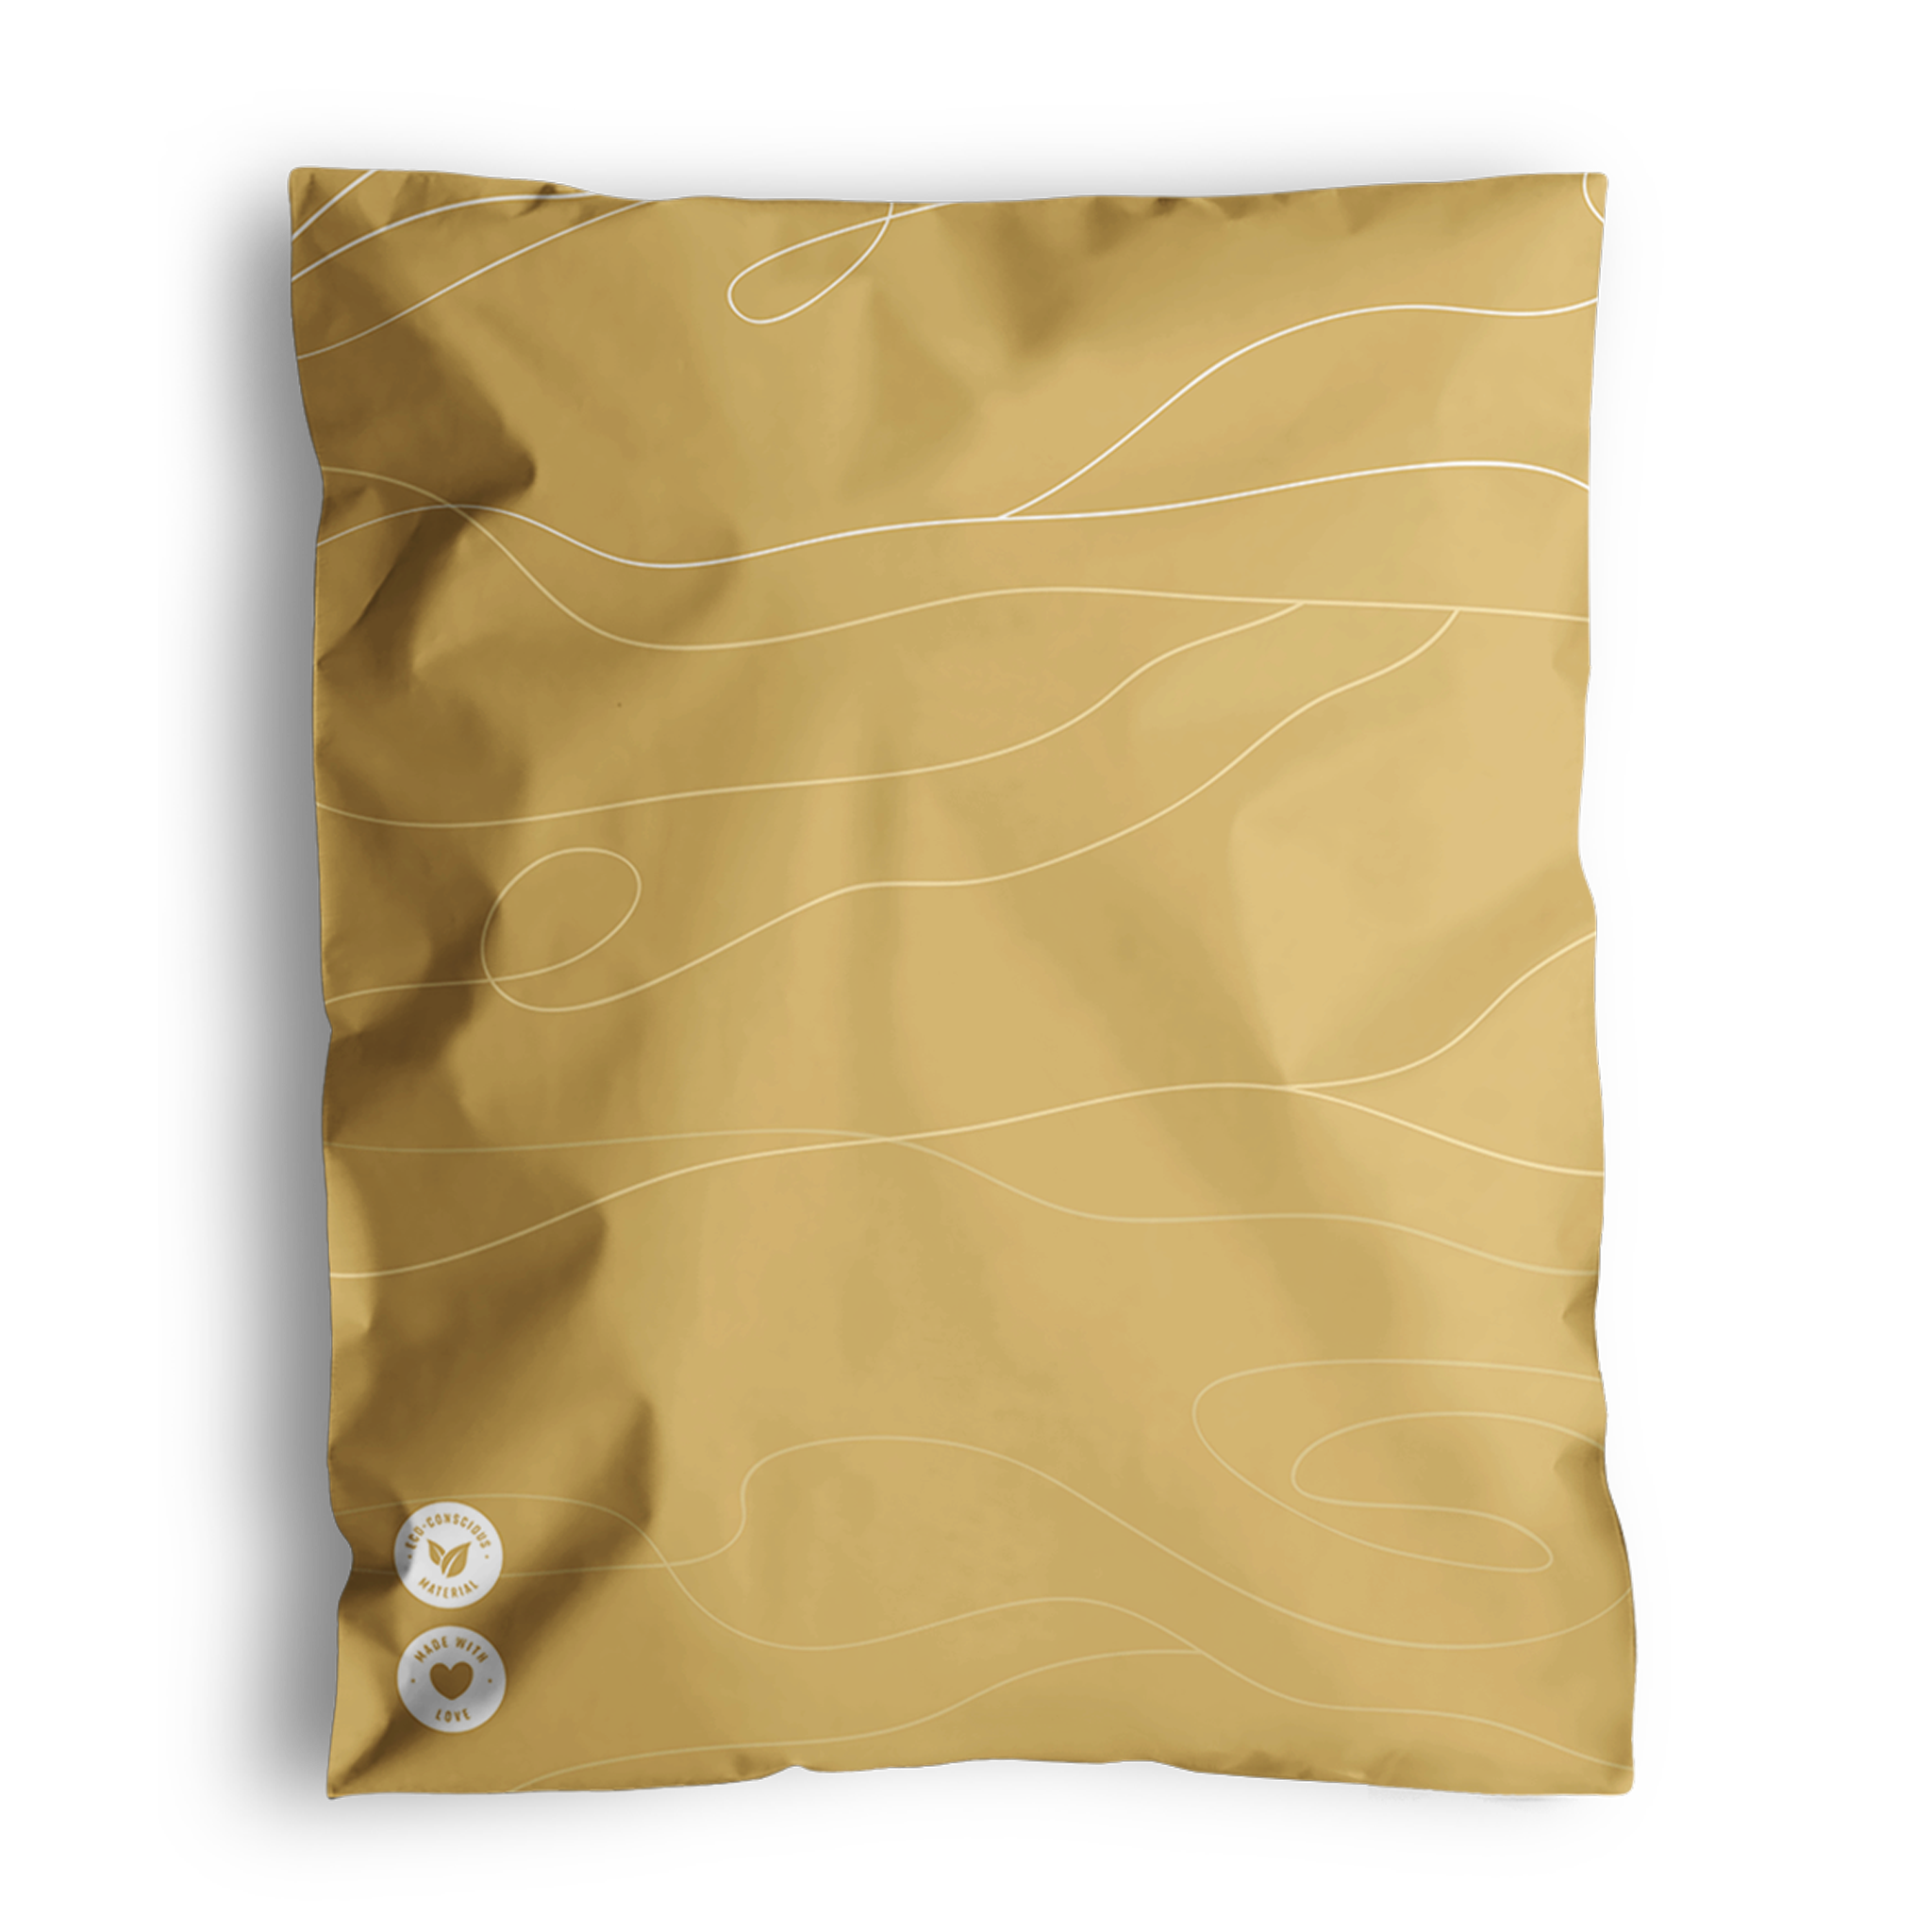 A crumpled yellow packaging bag with subtle white wavy lines and two round labels in the bottom left corner, offering versatile packaging options, Tidal Amber Mailers 10" x 13" by impack.co.